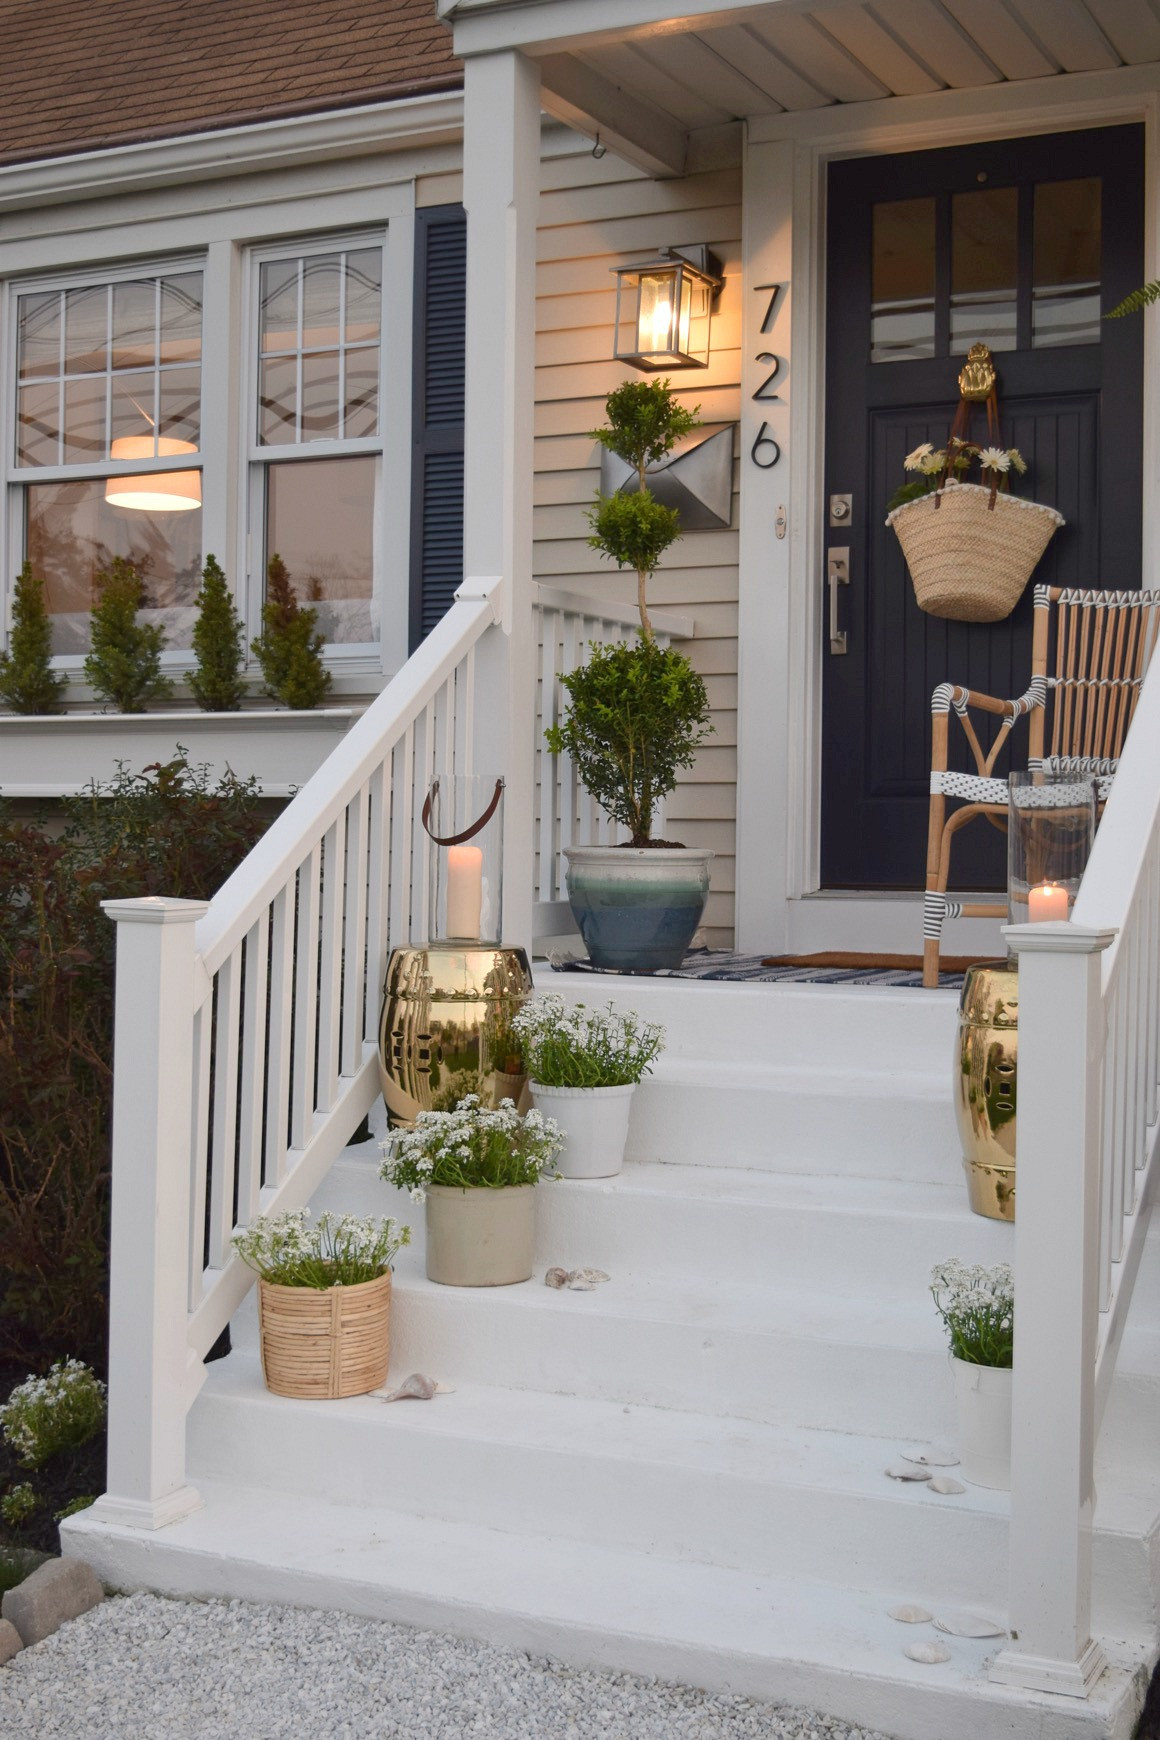 Backyard Porches Ideas
 Front Porch Ideas and Designing the Outdoors Nesting